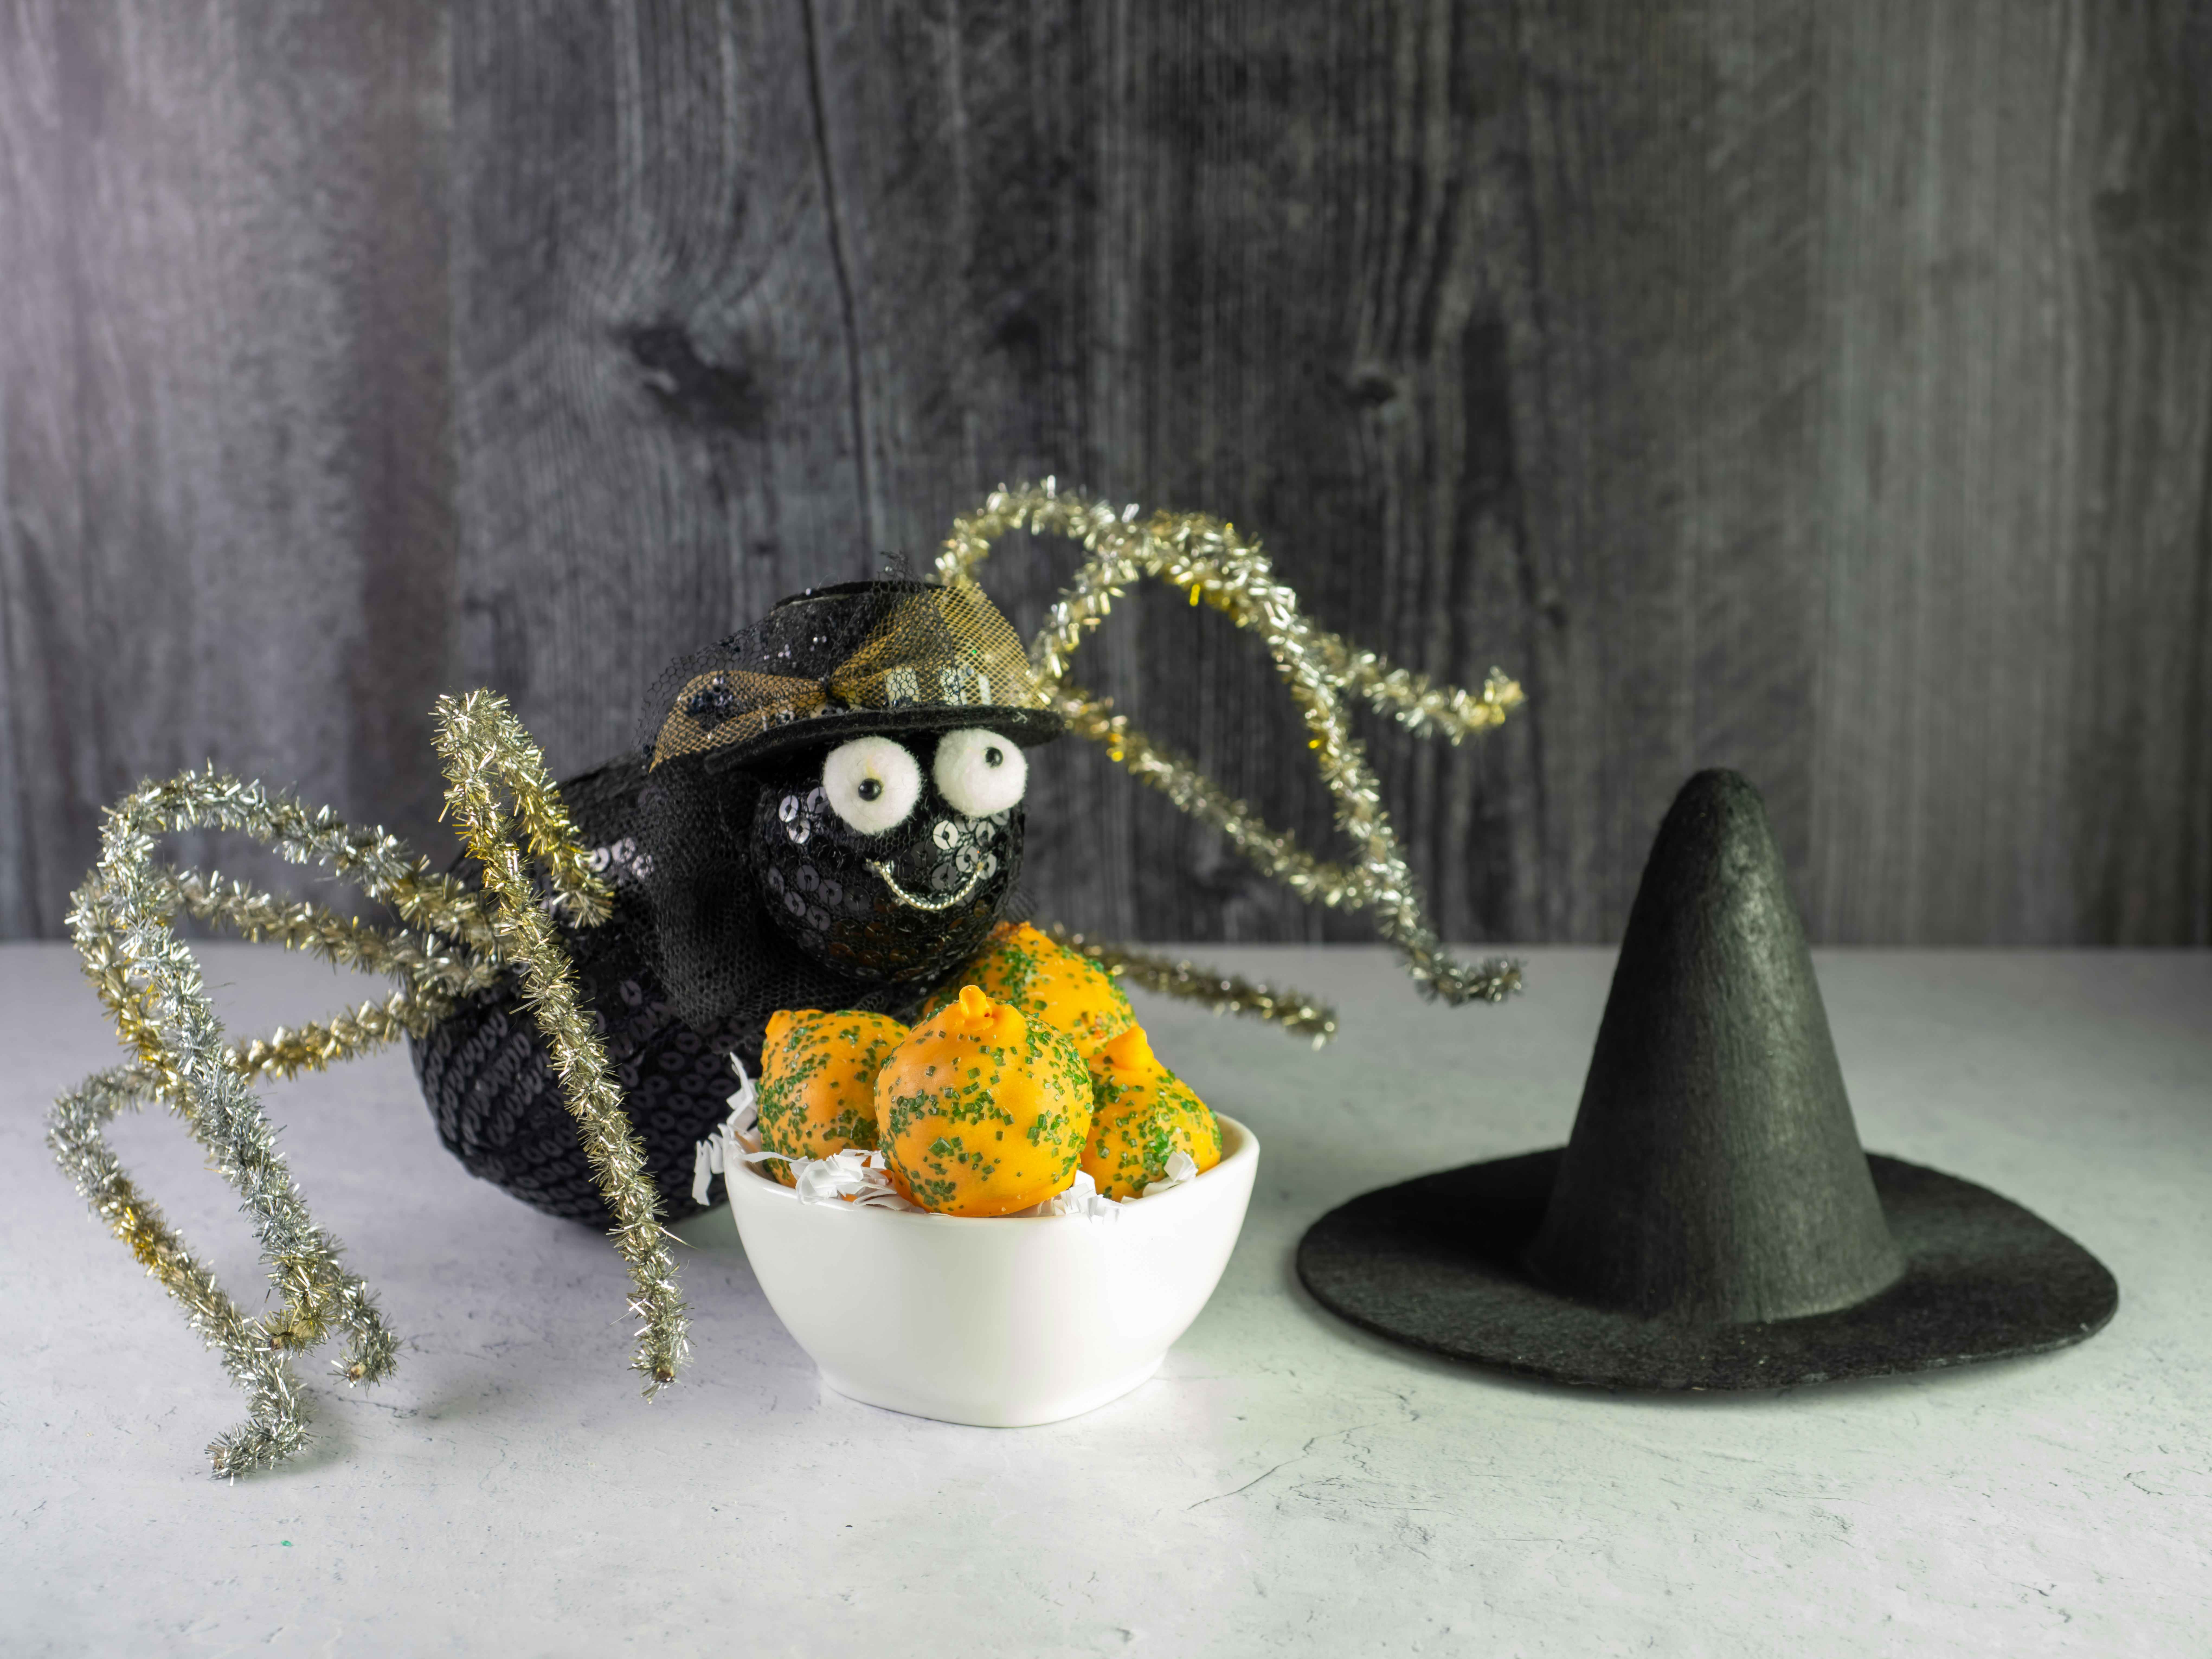 A crafted spider sitting on a table next to some treats and a little witch hat.